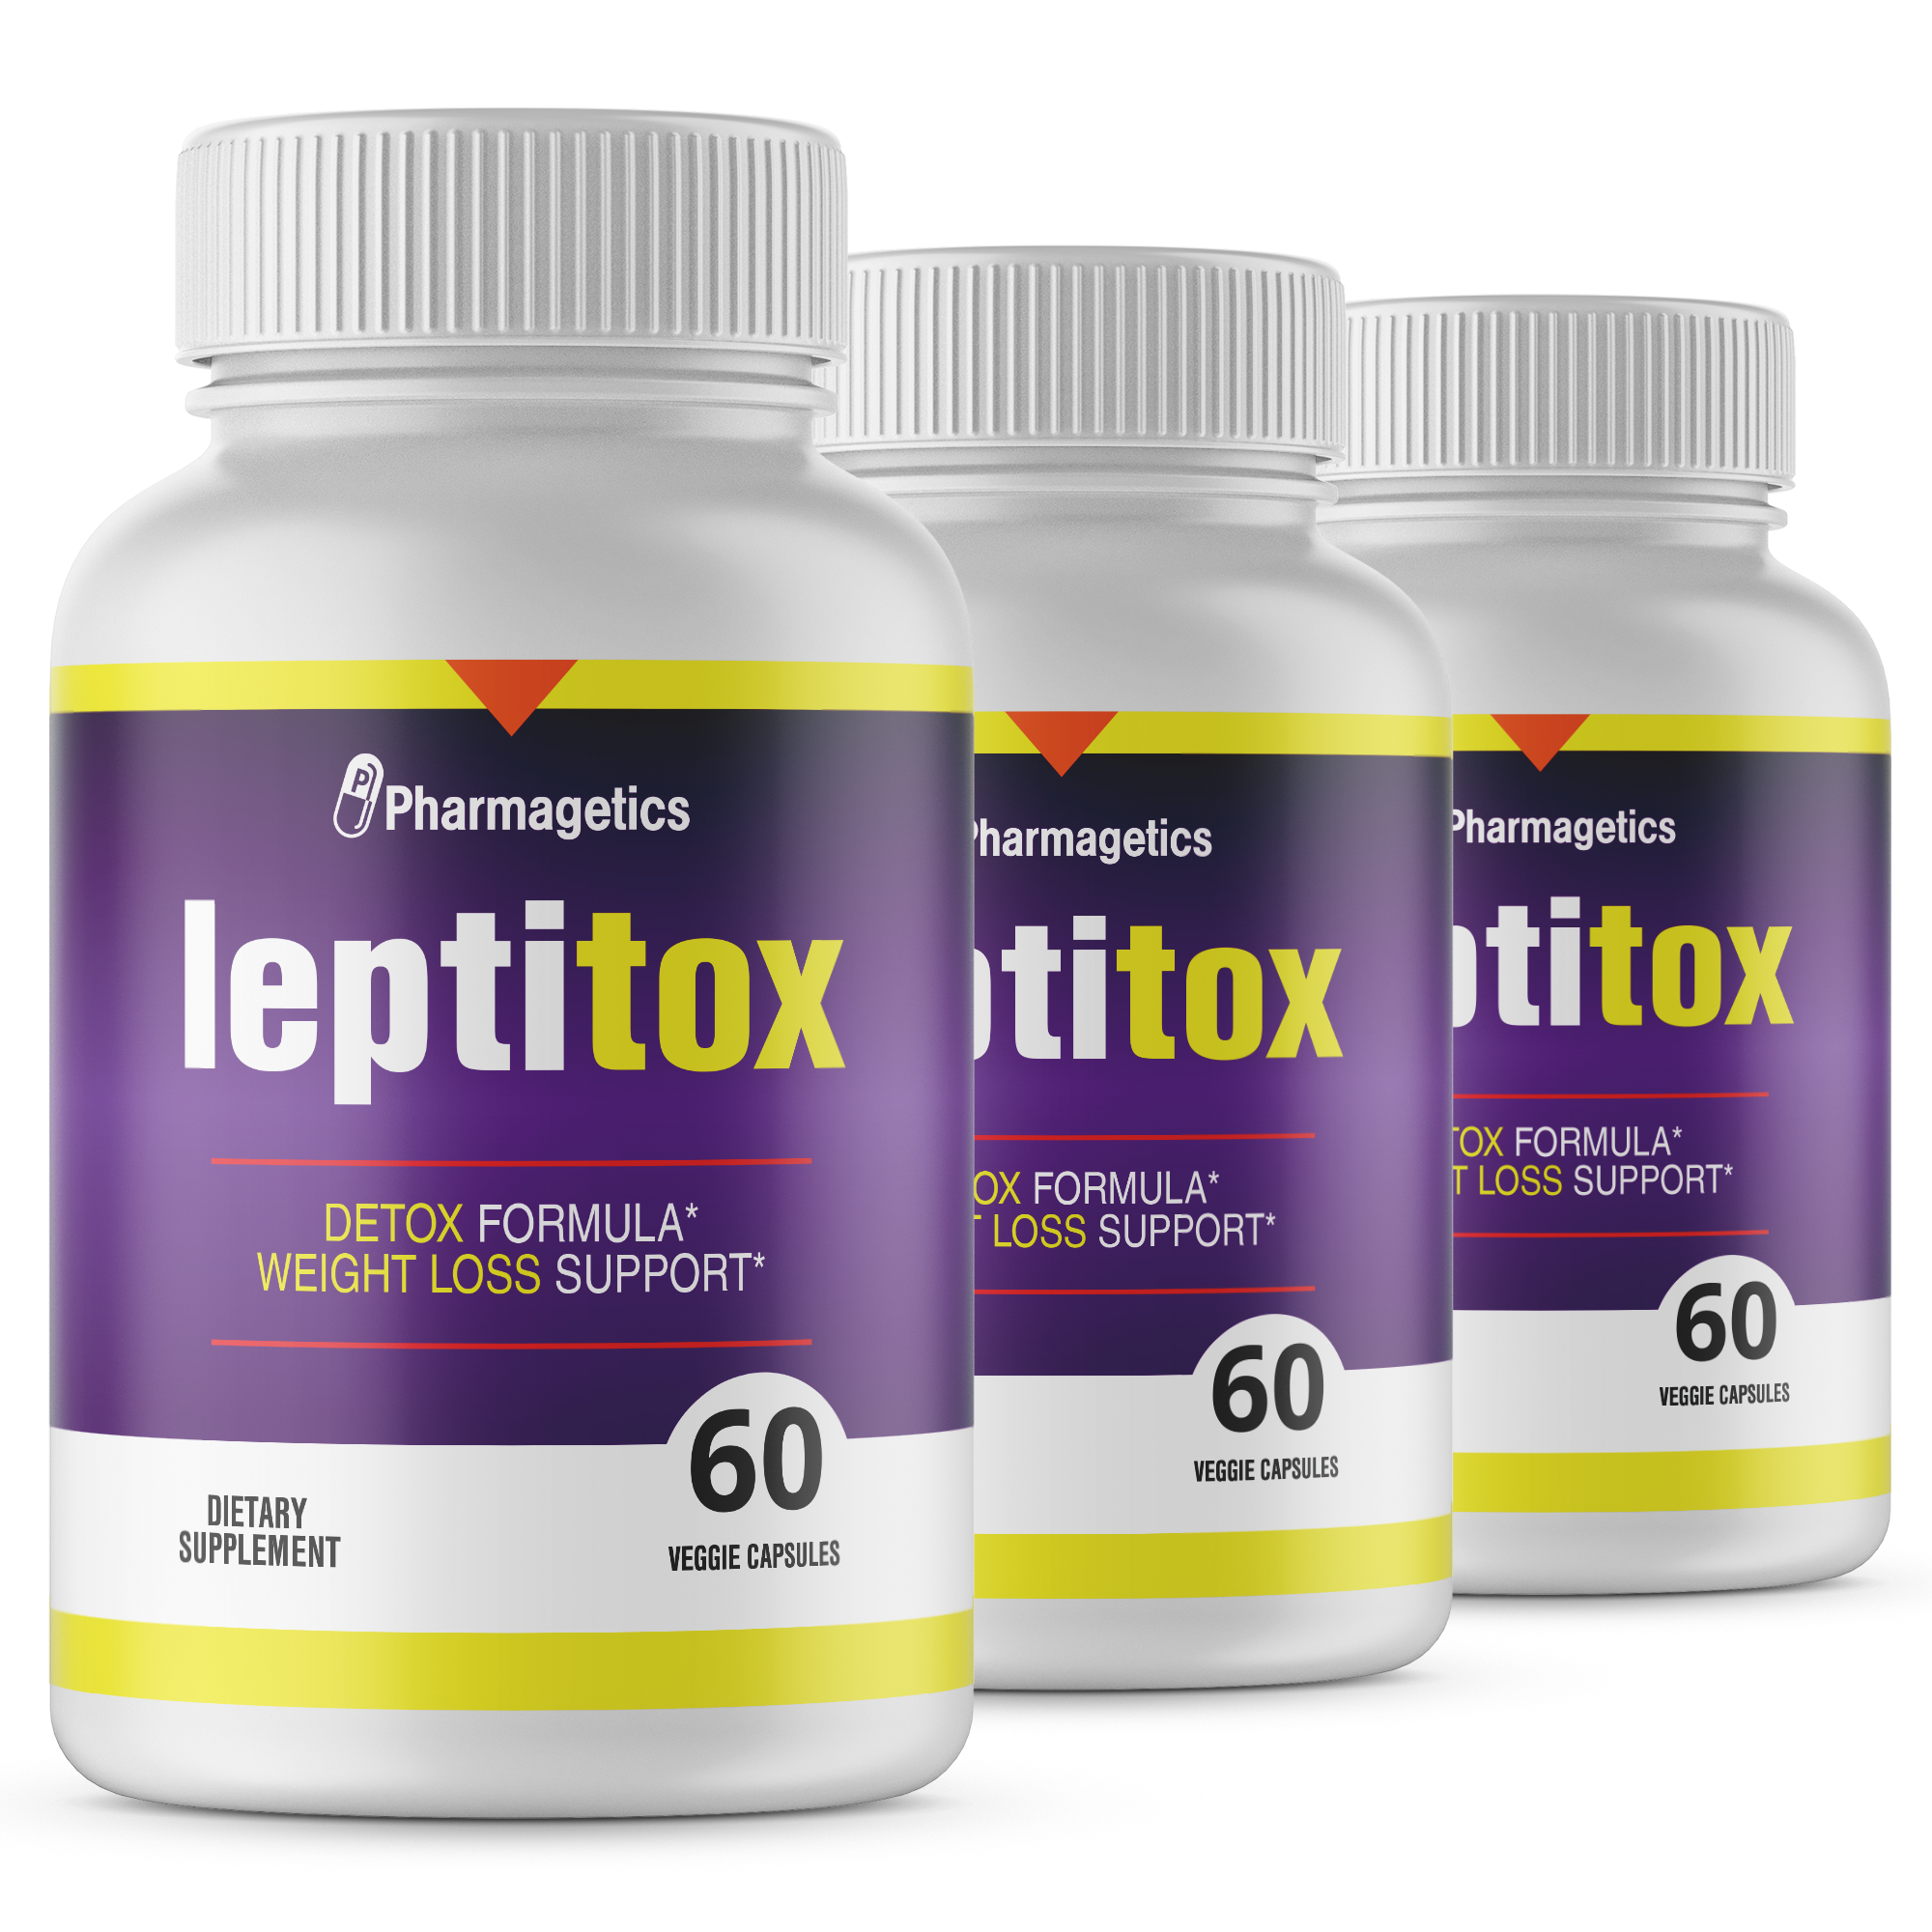 Leptitox Detox Formula  Weight Loss Support 60 Capsules, 3 Bottles